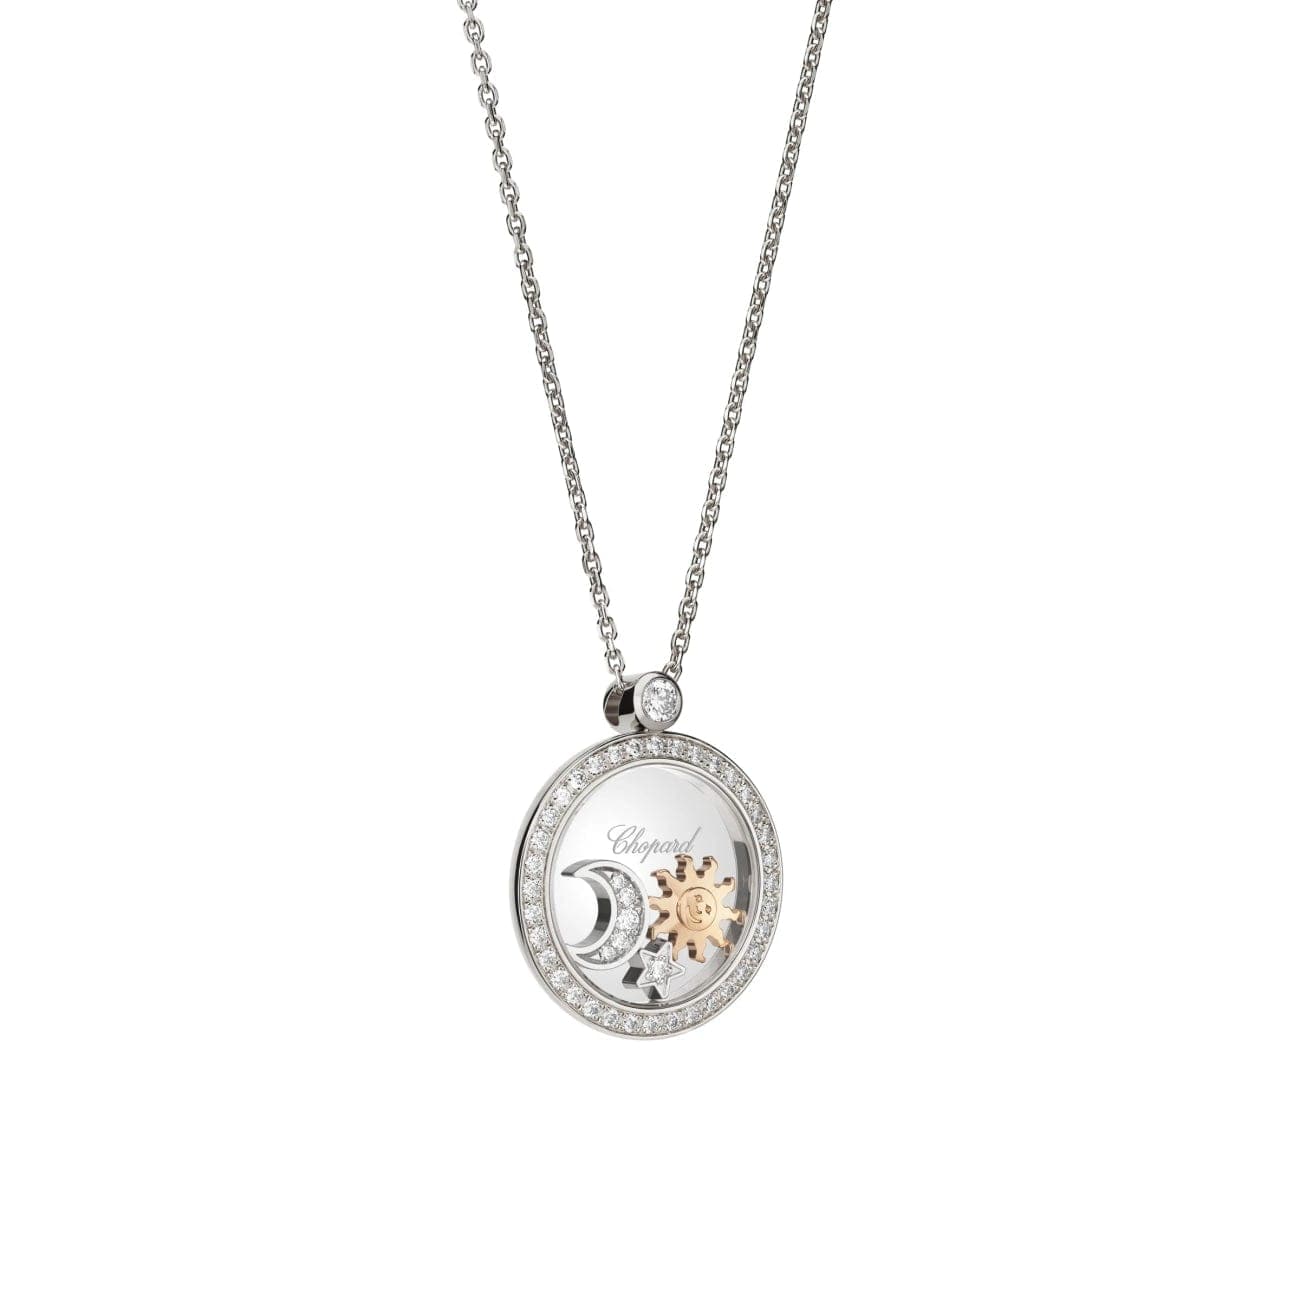 Chopard Floating Diamond Necklace Enquire About Similar